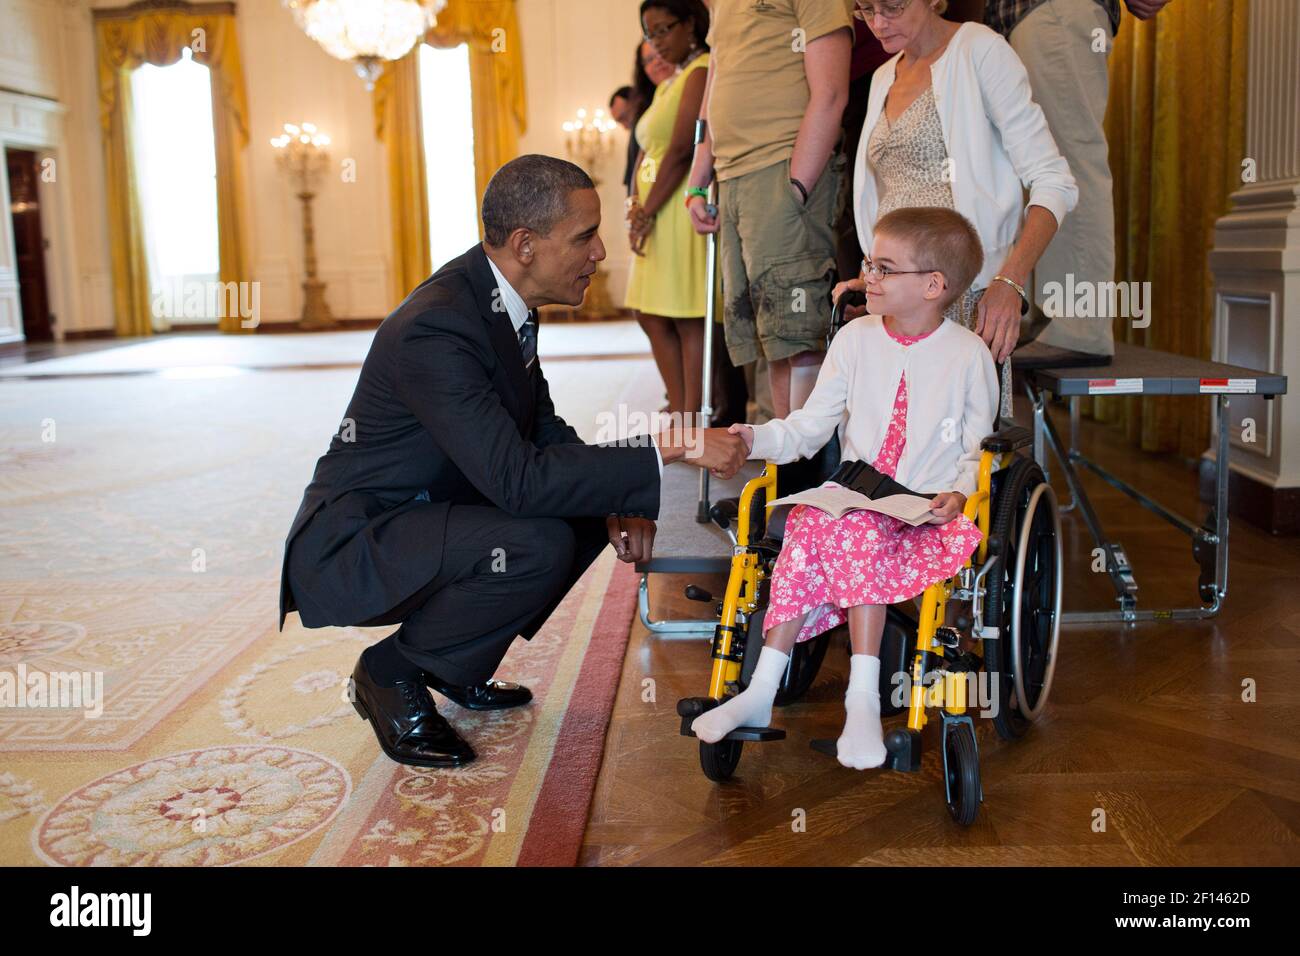 President Barack Obama greets Holli Benson during a visit with wounded warriors in the East Room of the White House, Aug. 23, 2012. Benson accompanied her brother, SSG Michael Benson, during a tour of the White House Stock Photo